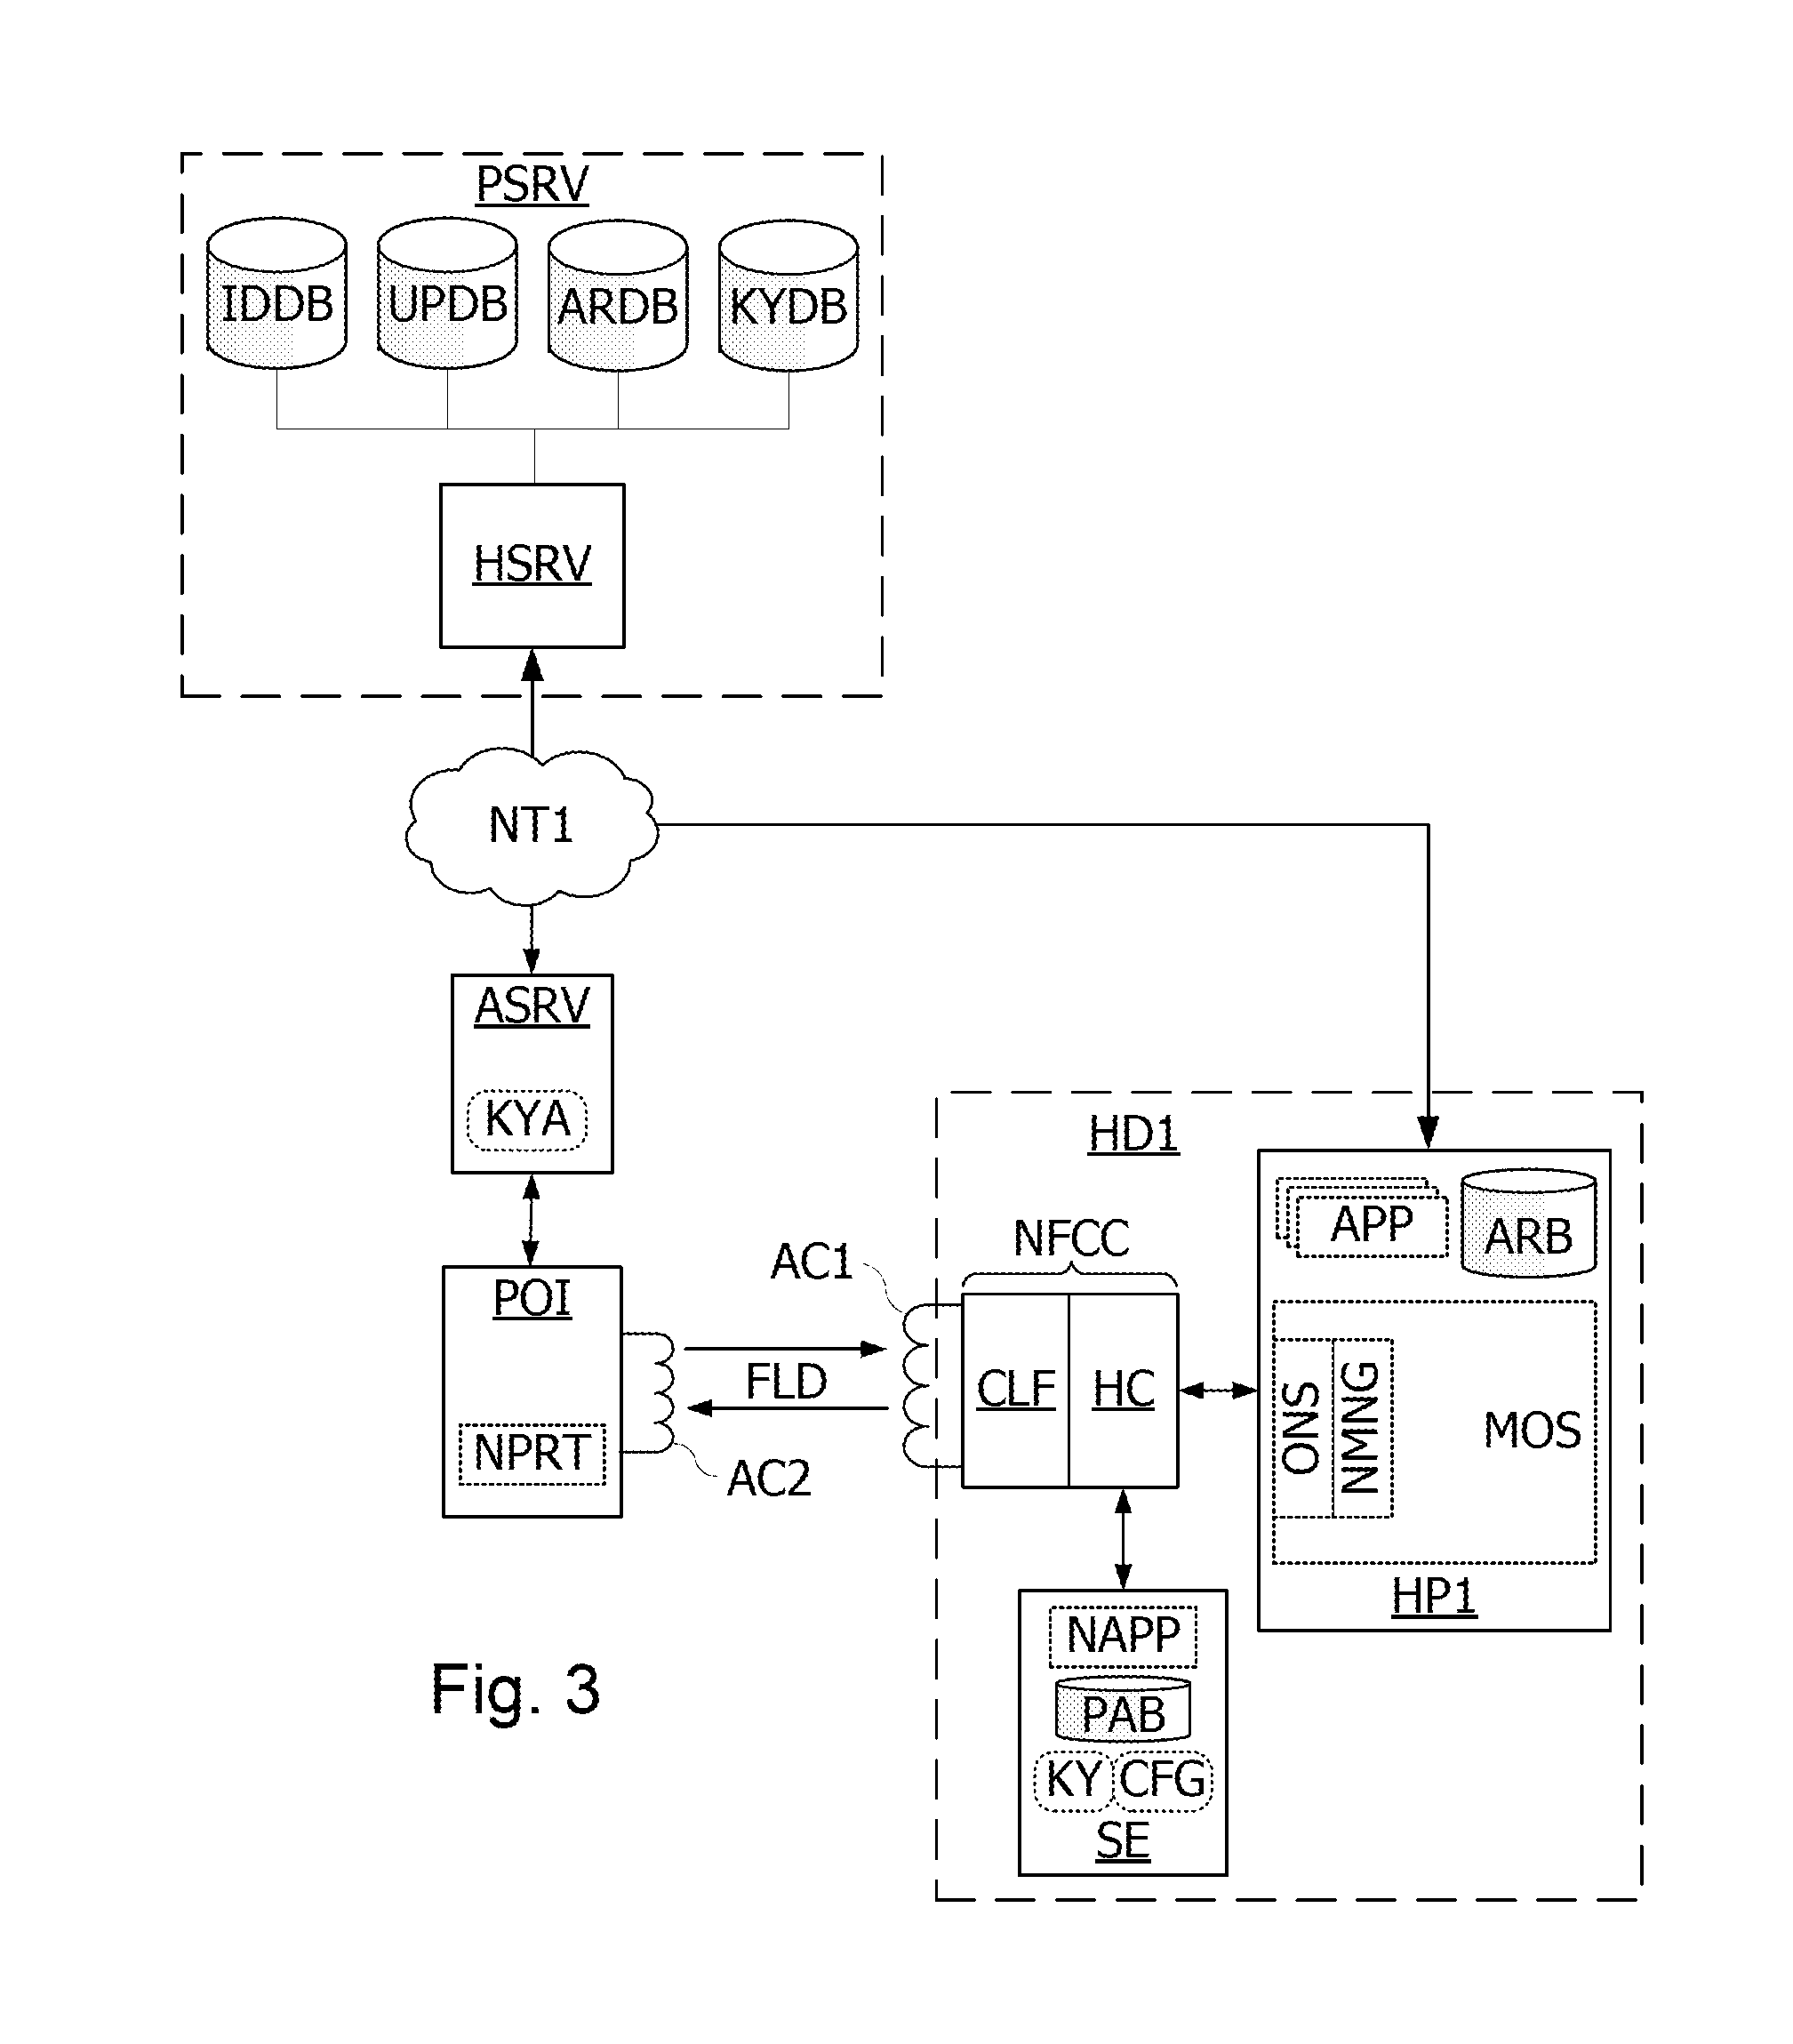 Method of performing a secure application in an NFC device